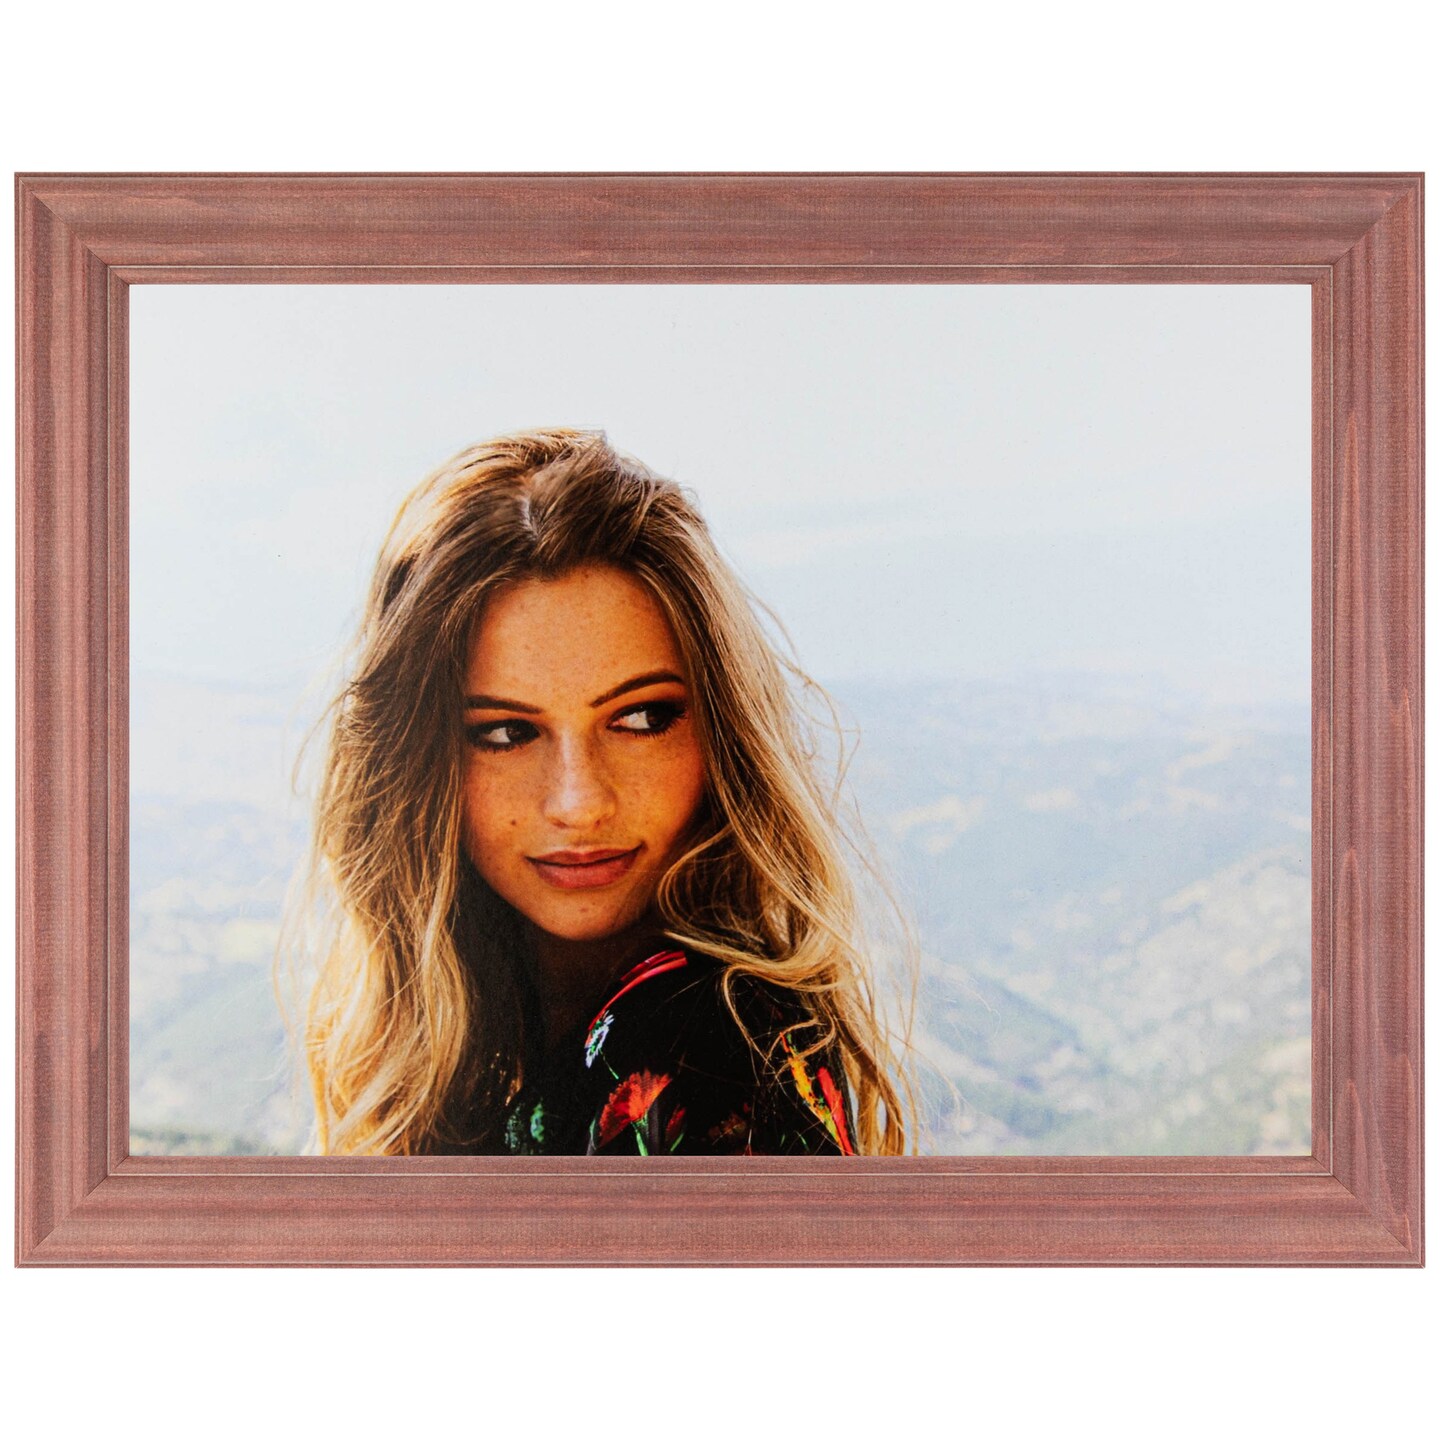 Brown Wood 30x40 Picture Frame 30x40 Frame Poster Photo